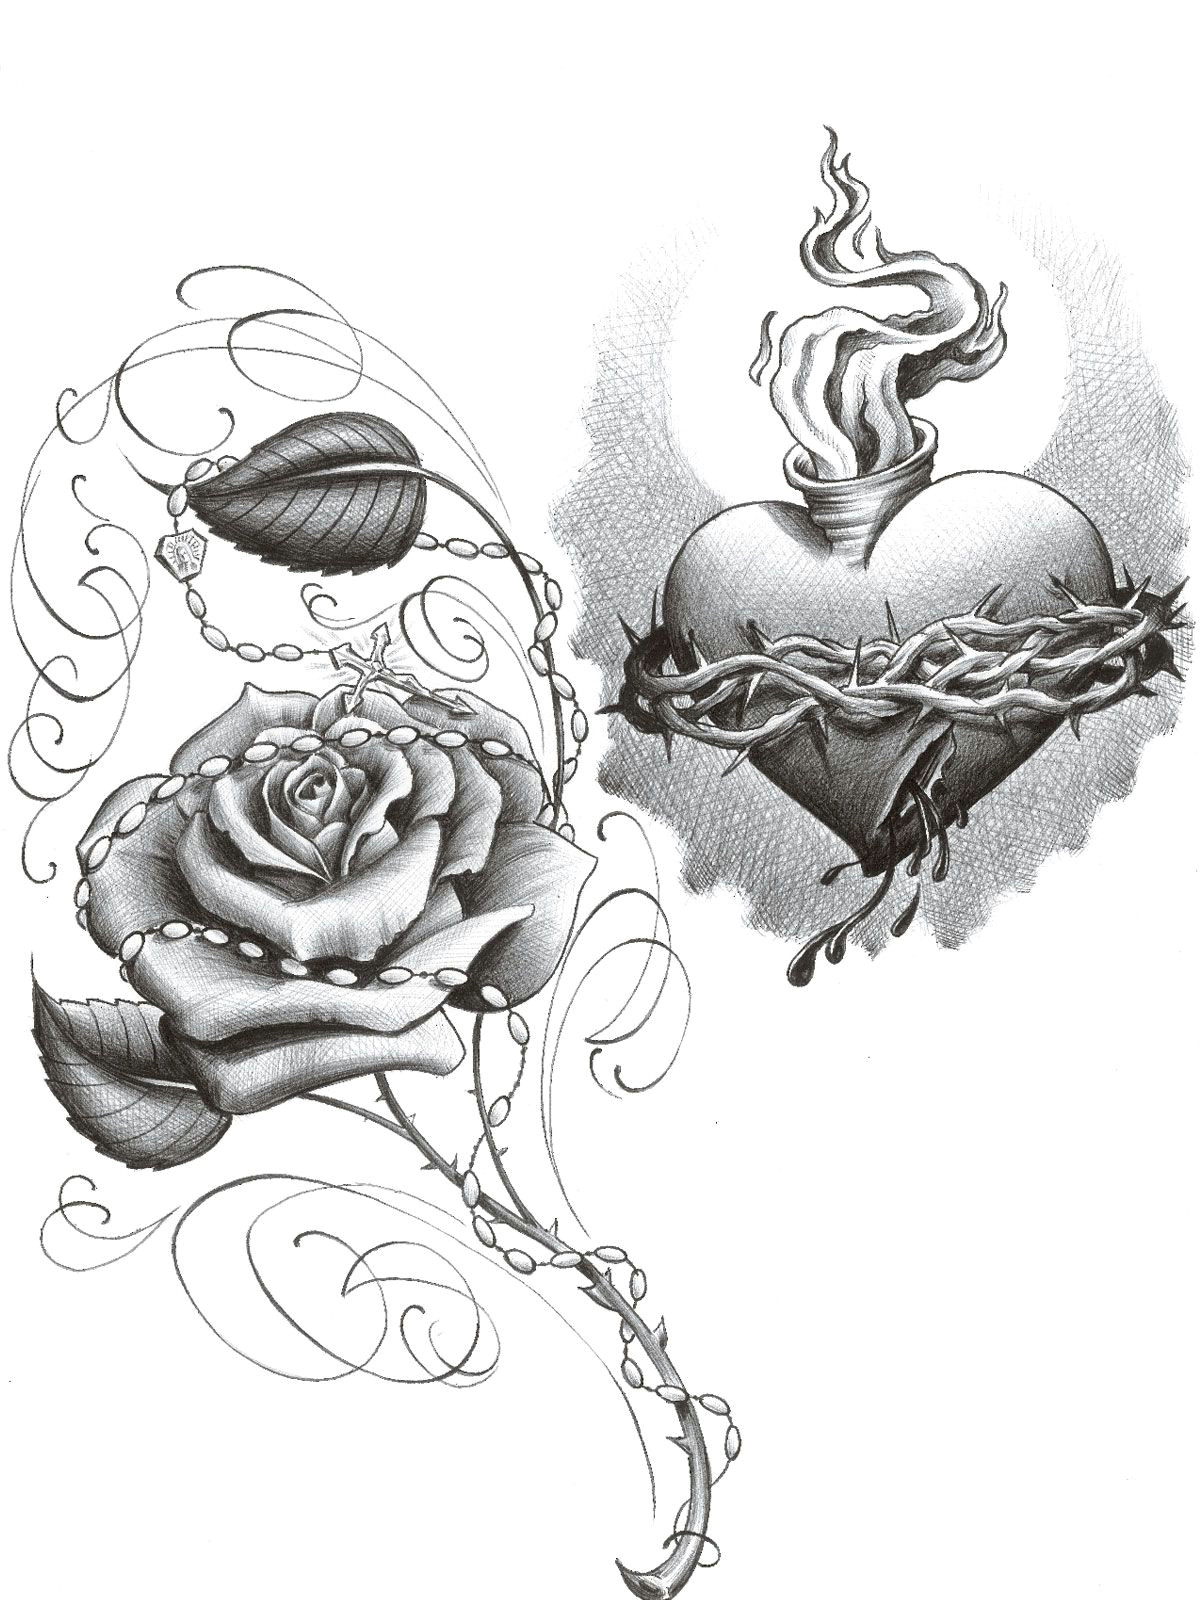 Drawing Of A Rose and Heart Lowrider Drawings Pictures Lowrider Art Image Lowrider Art